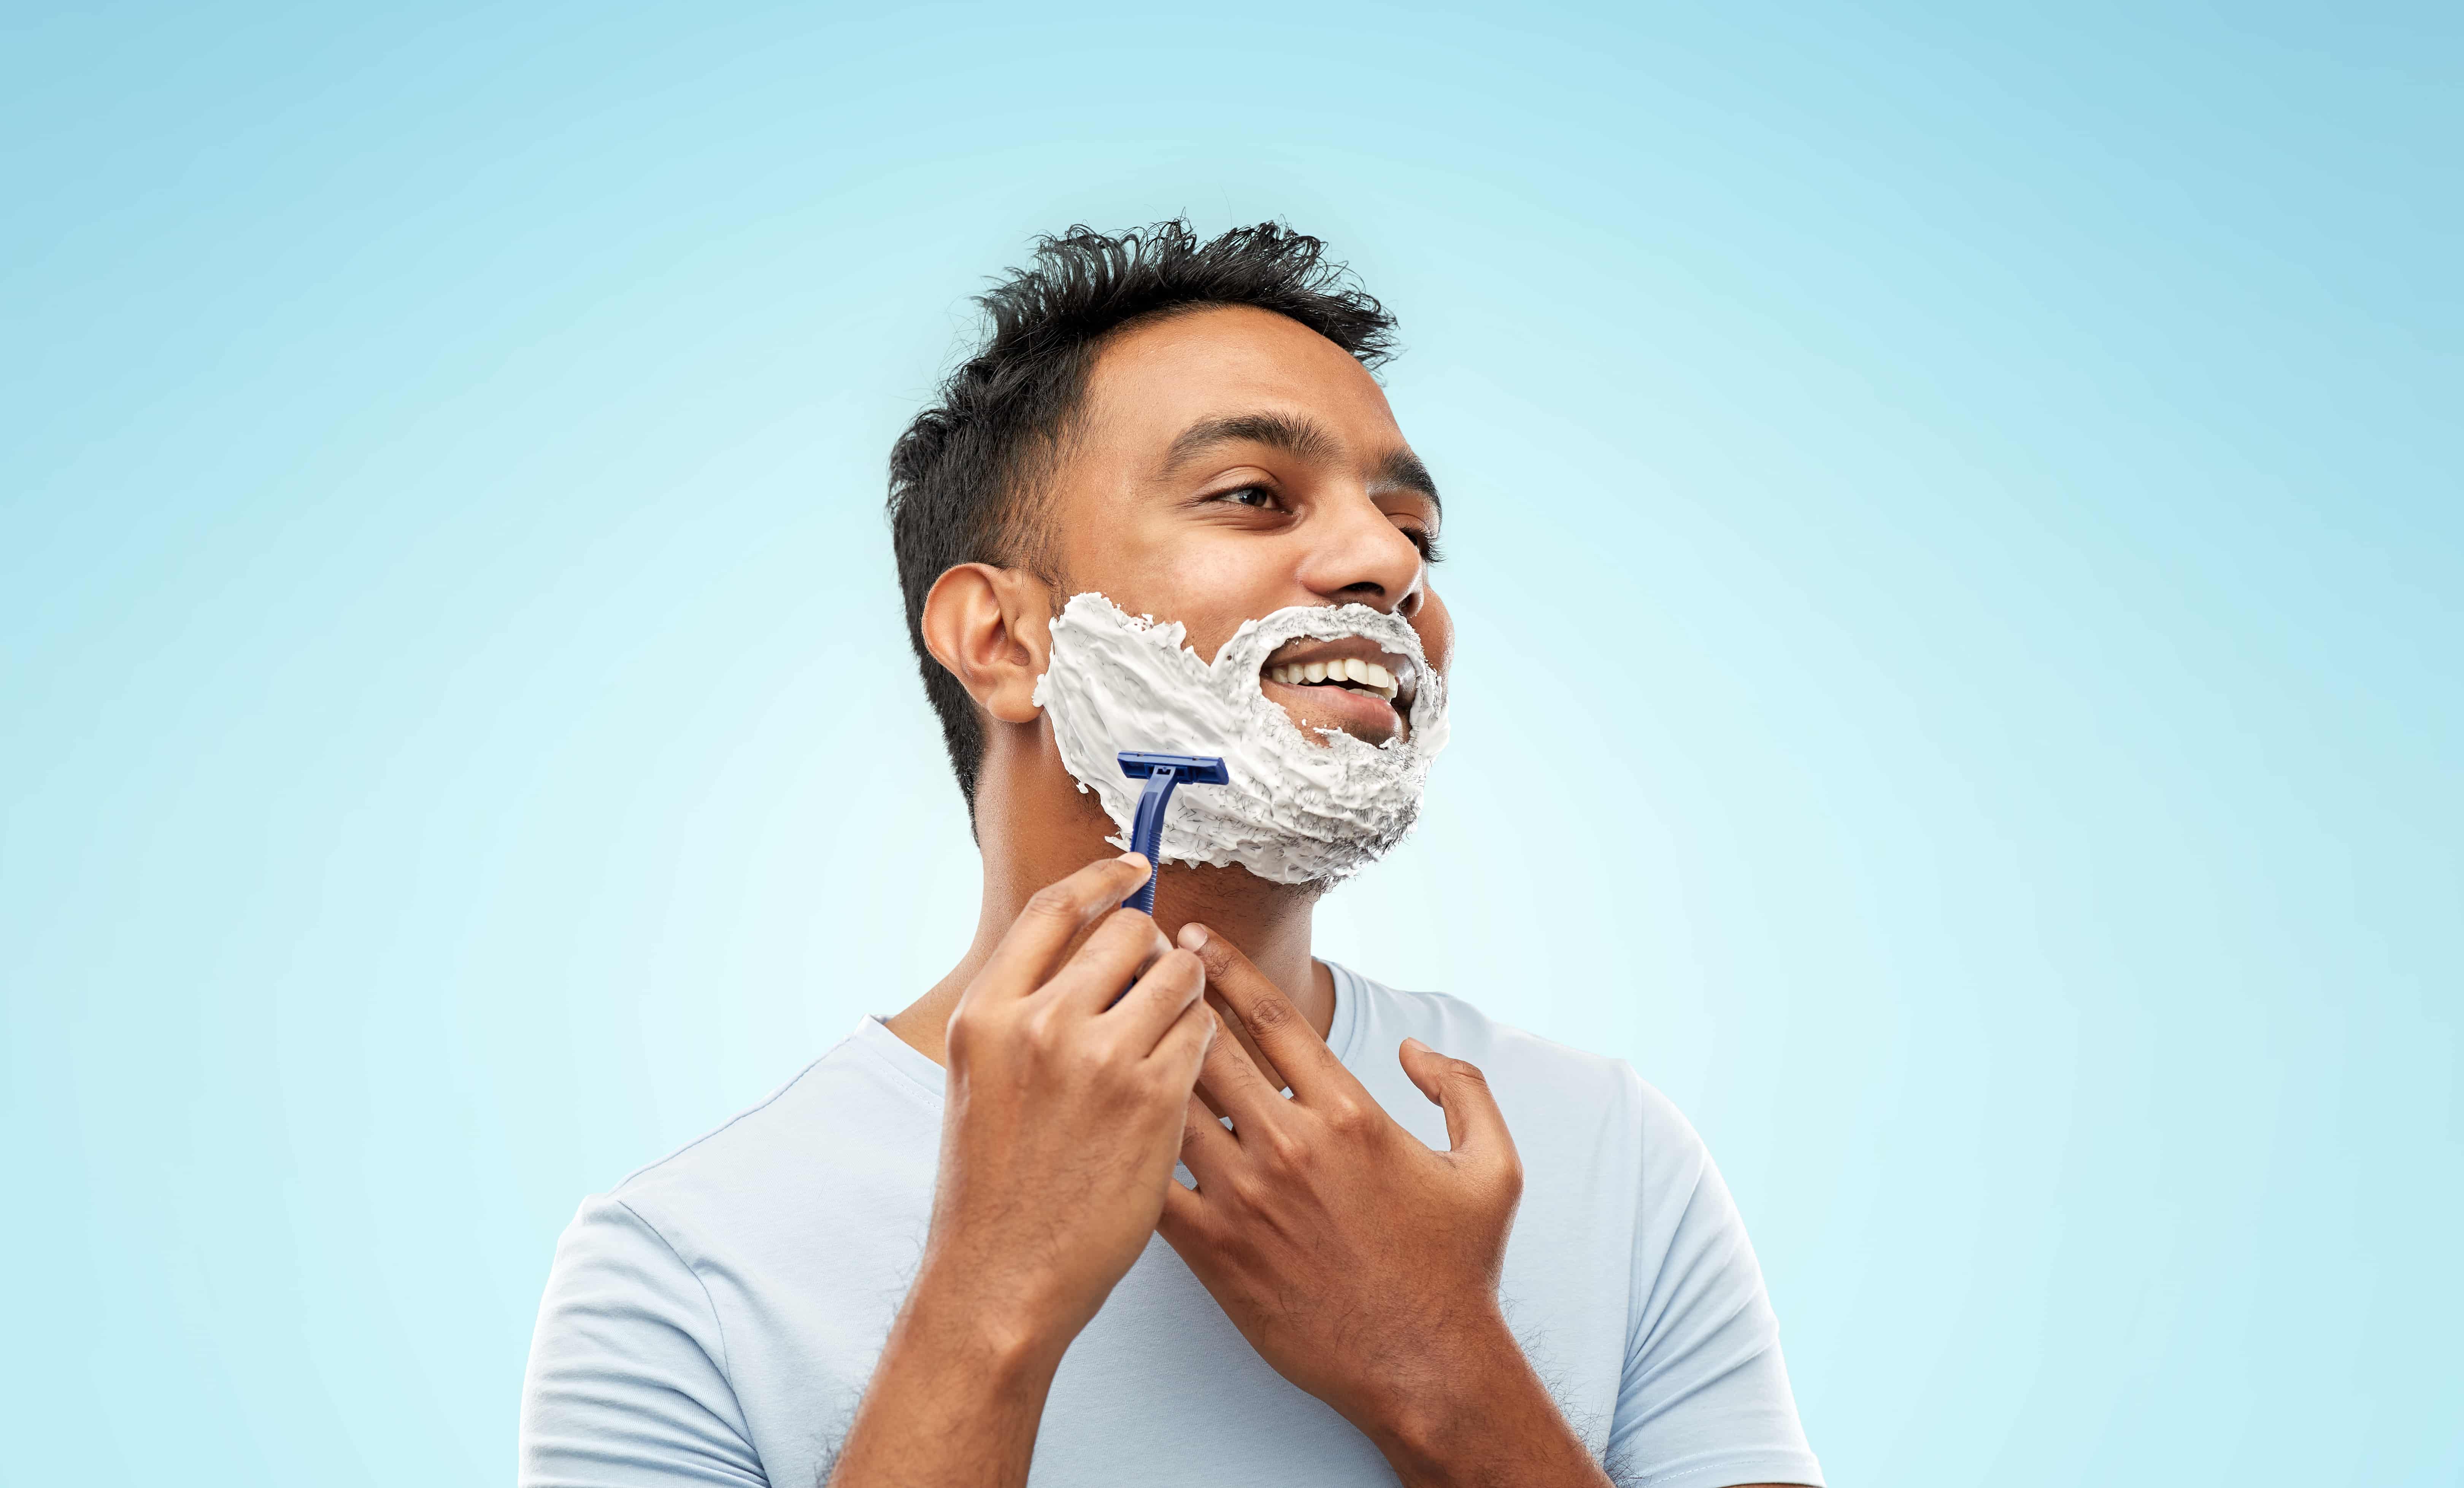 Is a single blade disposable razor better for acne?